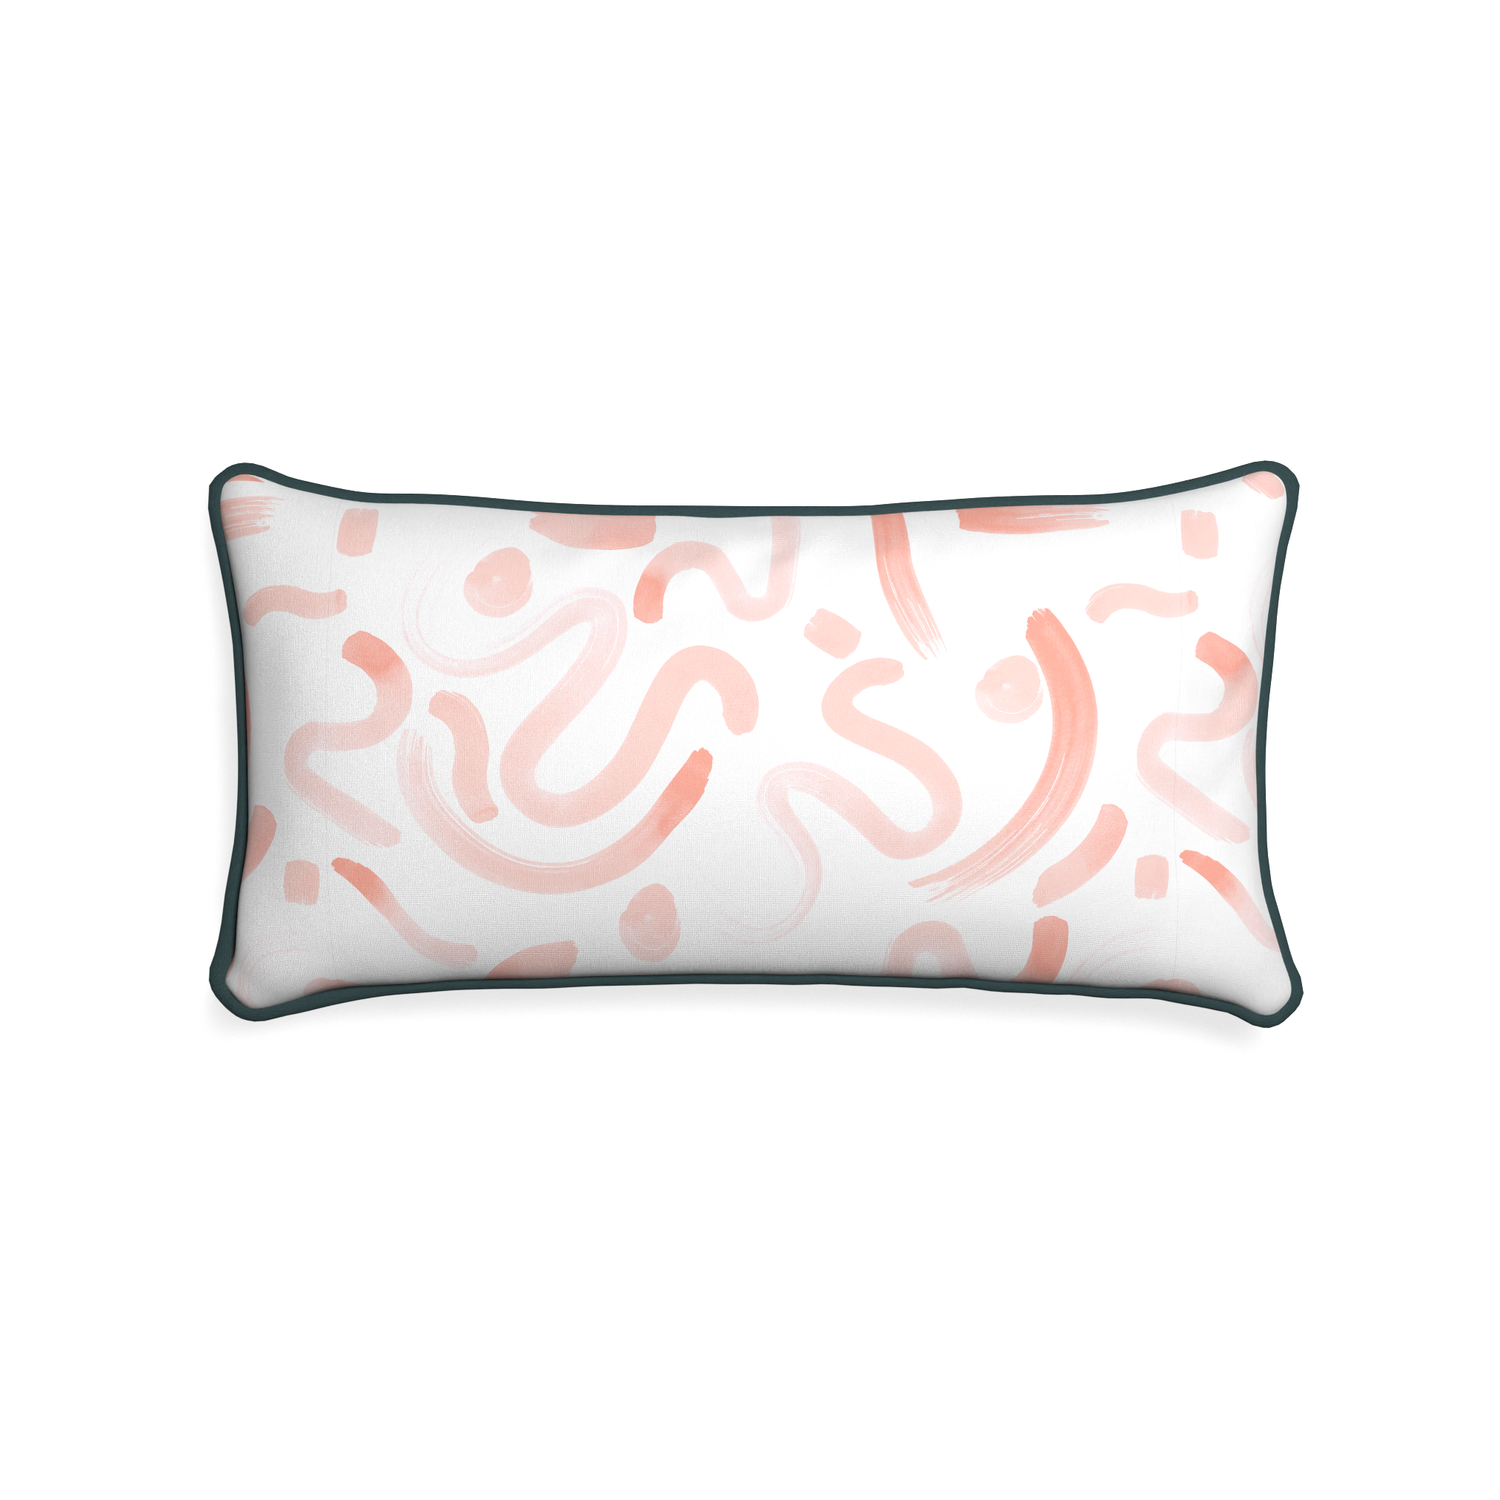 Midi-lumbar hockney pink custom pink graphicpillow with p piping on white background